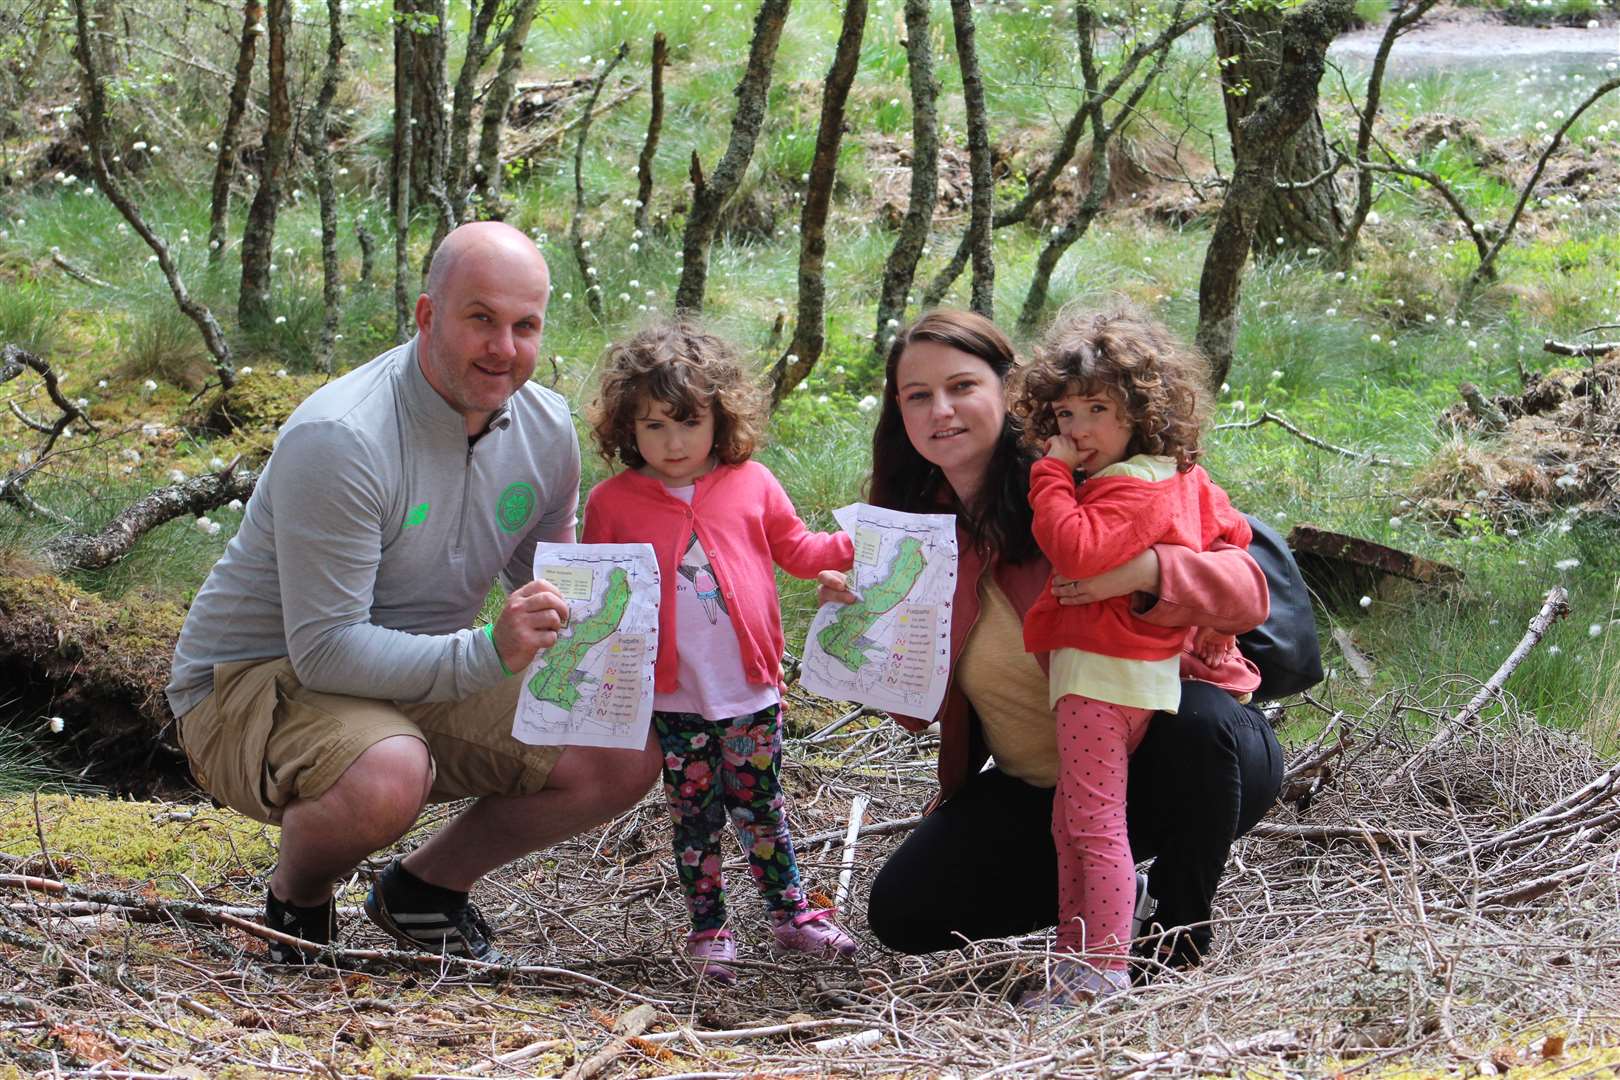 Mini Orienteering takes place at Culduthel Woods, Inverness on May 25.